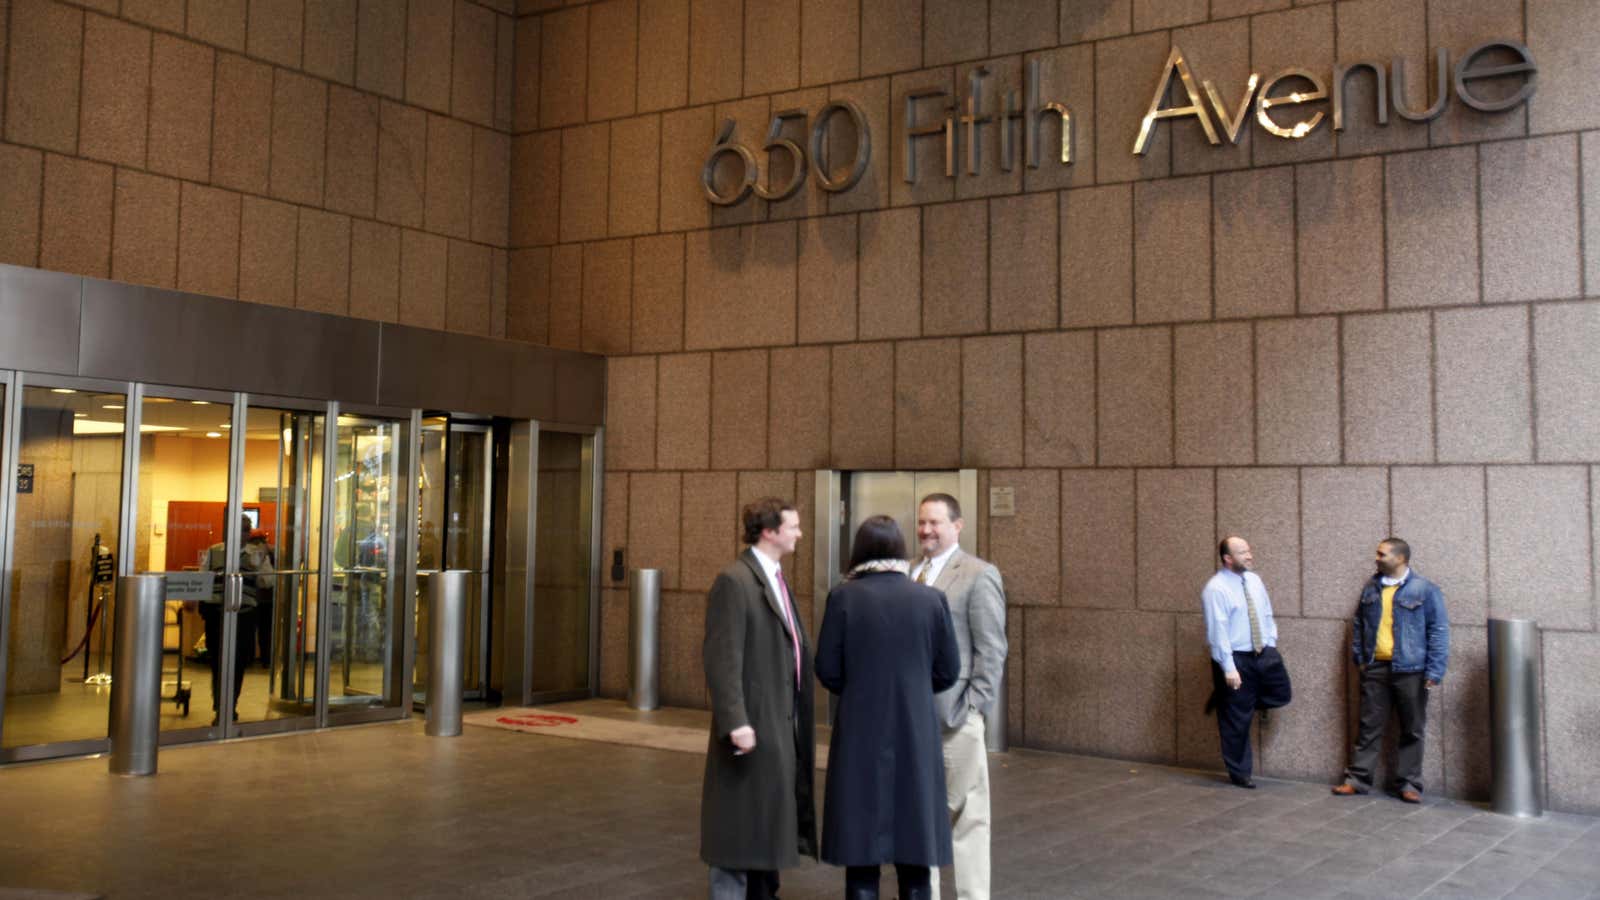 A court has found that 650 Fifth Avenue was essentially a front for Iran’s government.